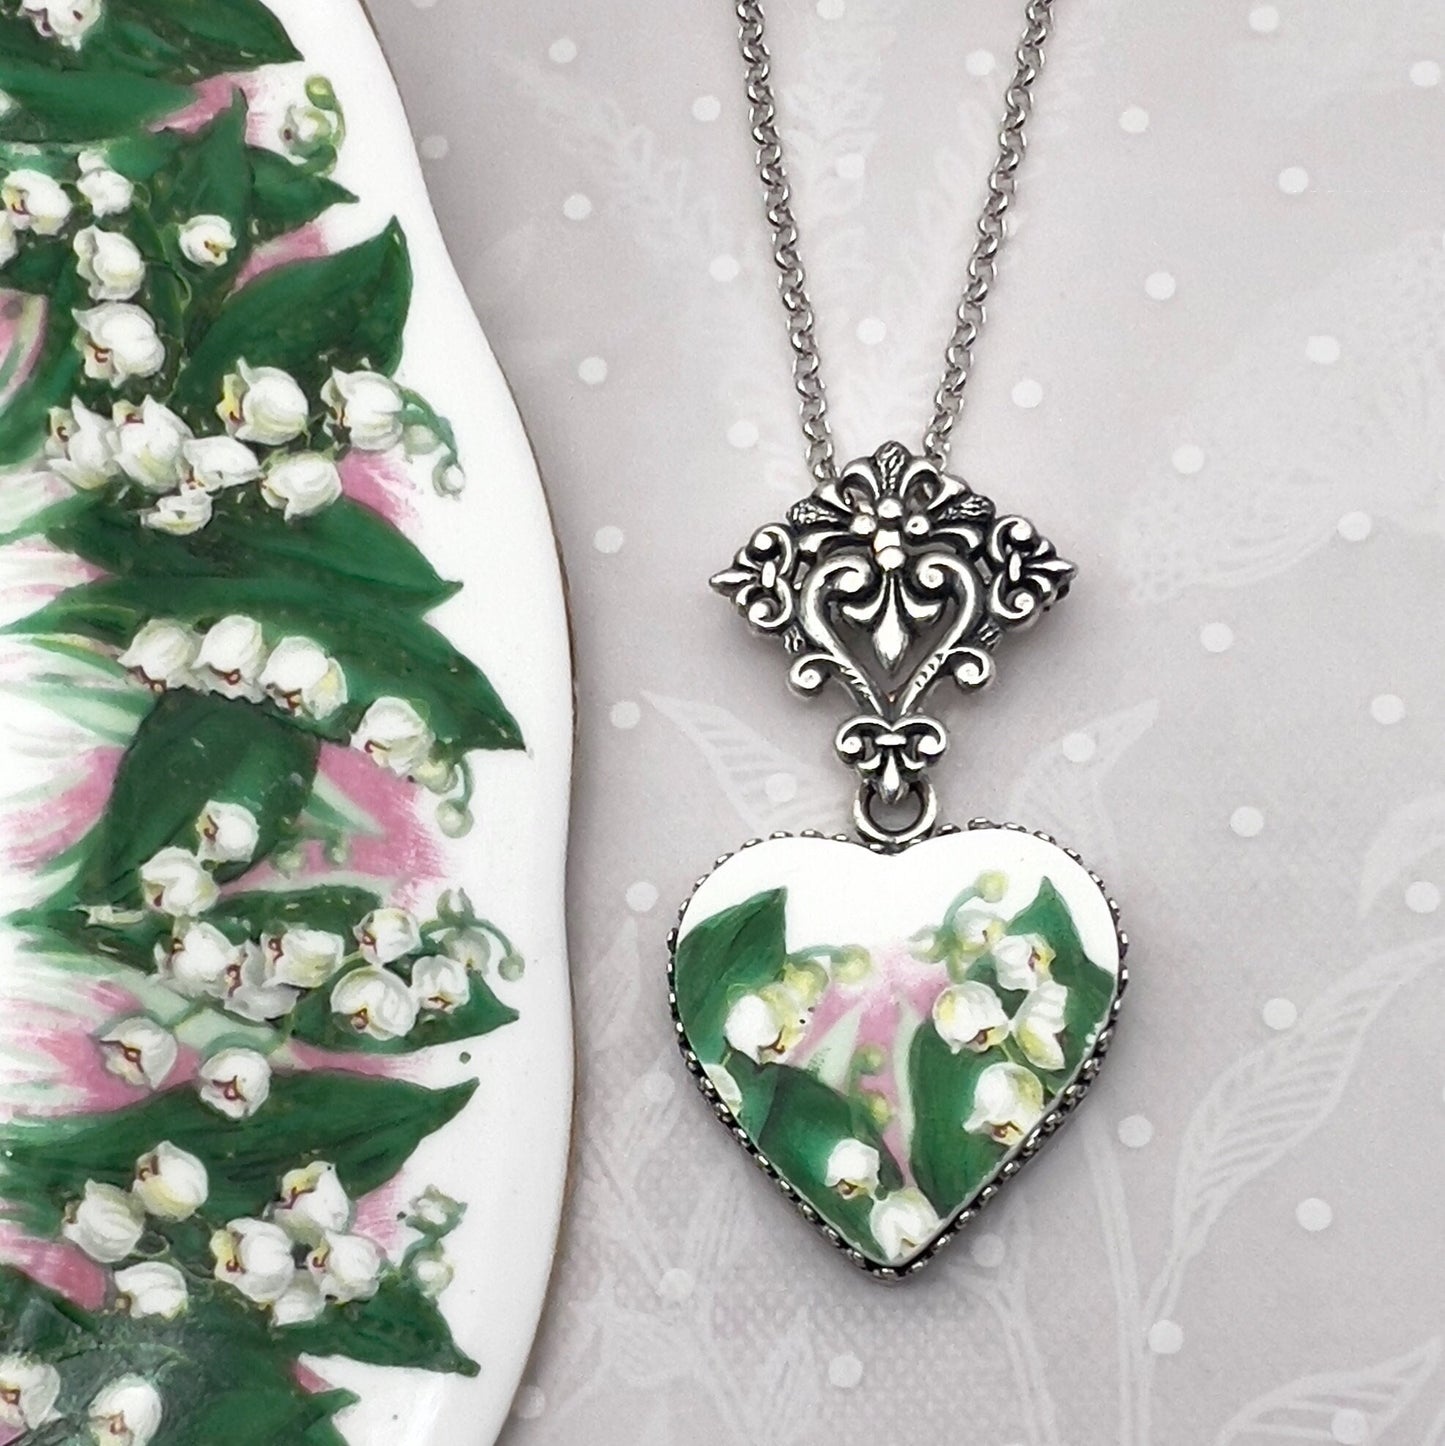 Romantic Victorian Heart Pendant Necklace or Brooch, Lily of the Valley Broken China Jewelry